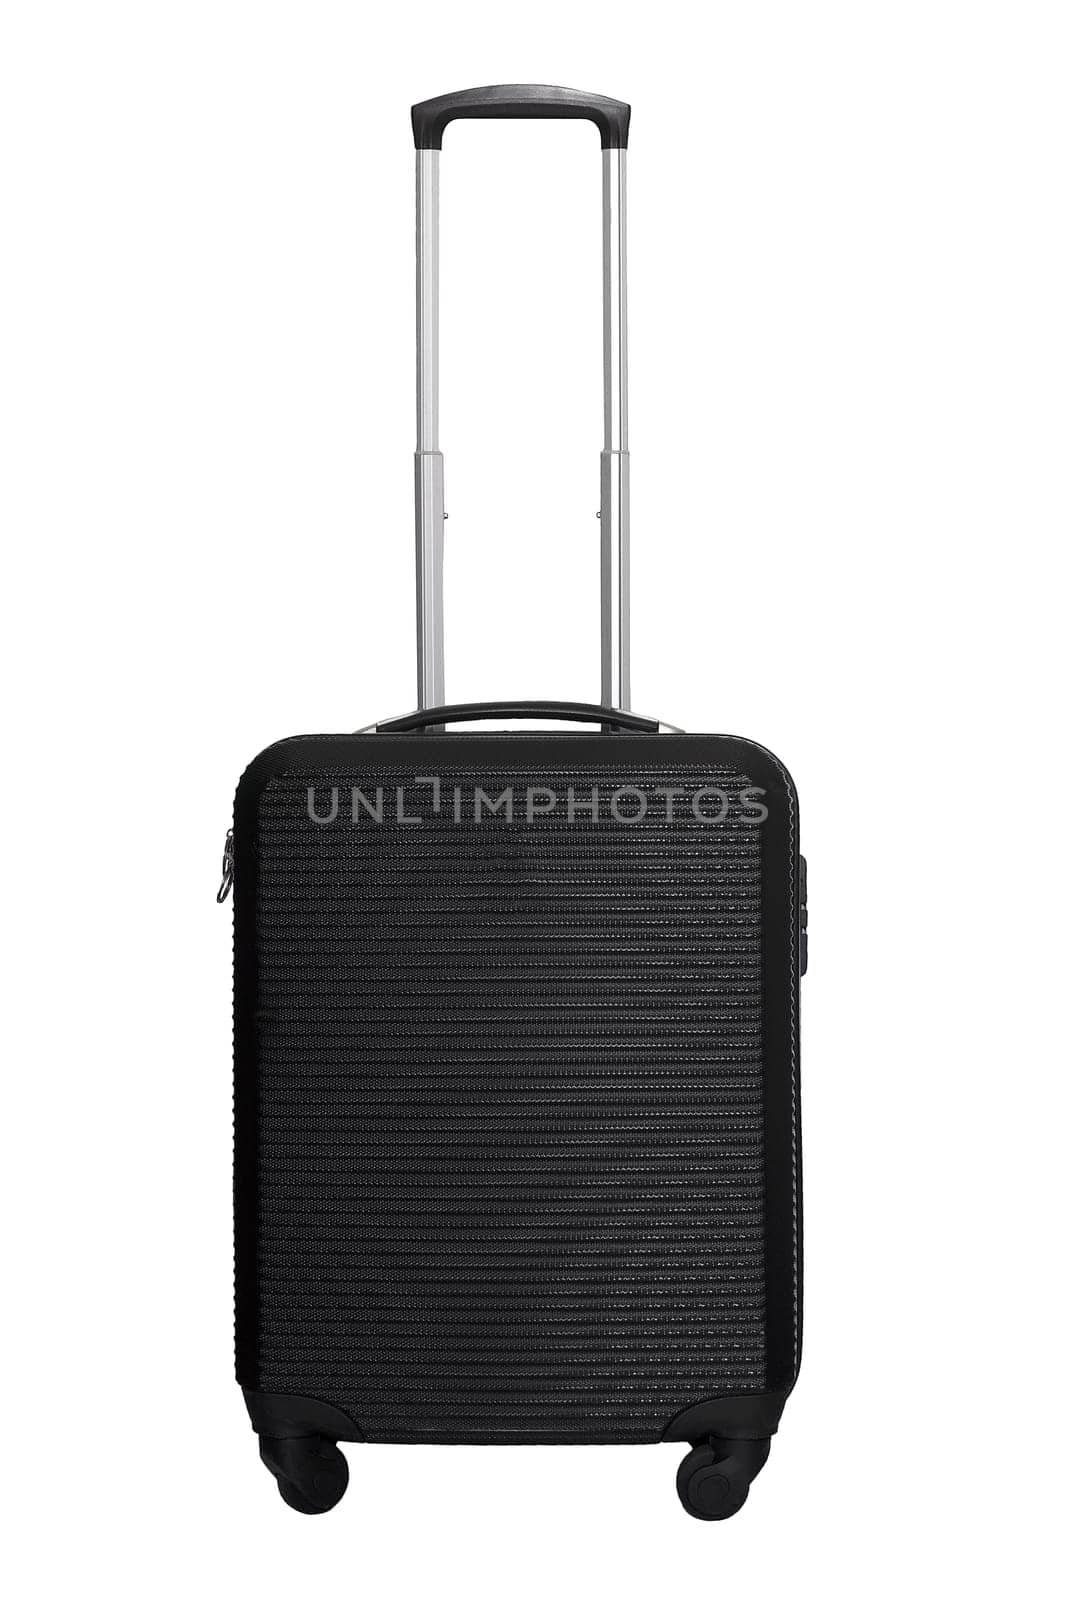 Black travel suitcase with open handle isolated on white background